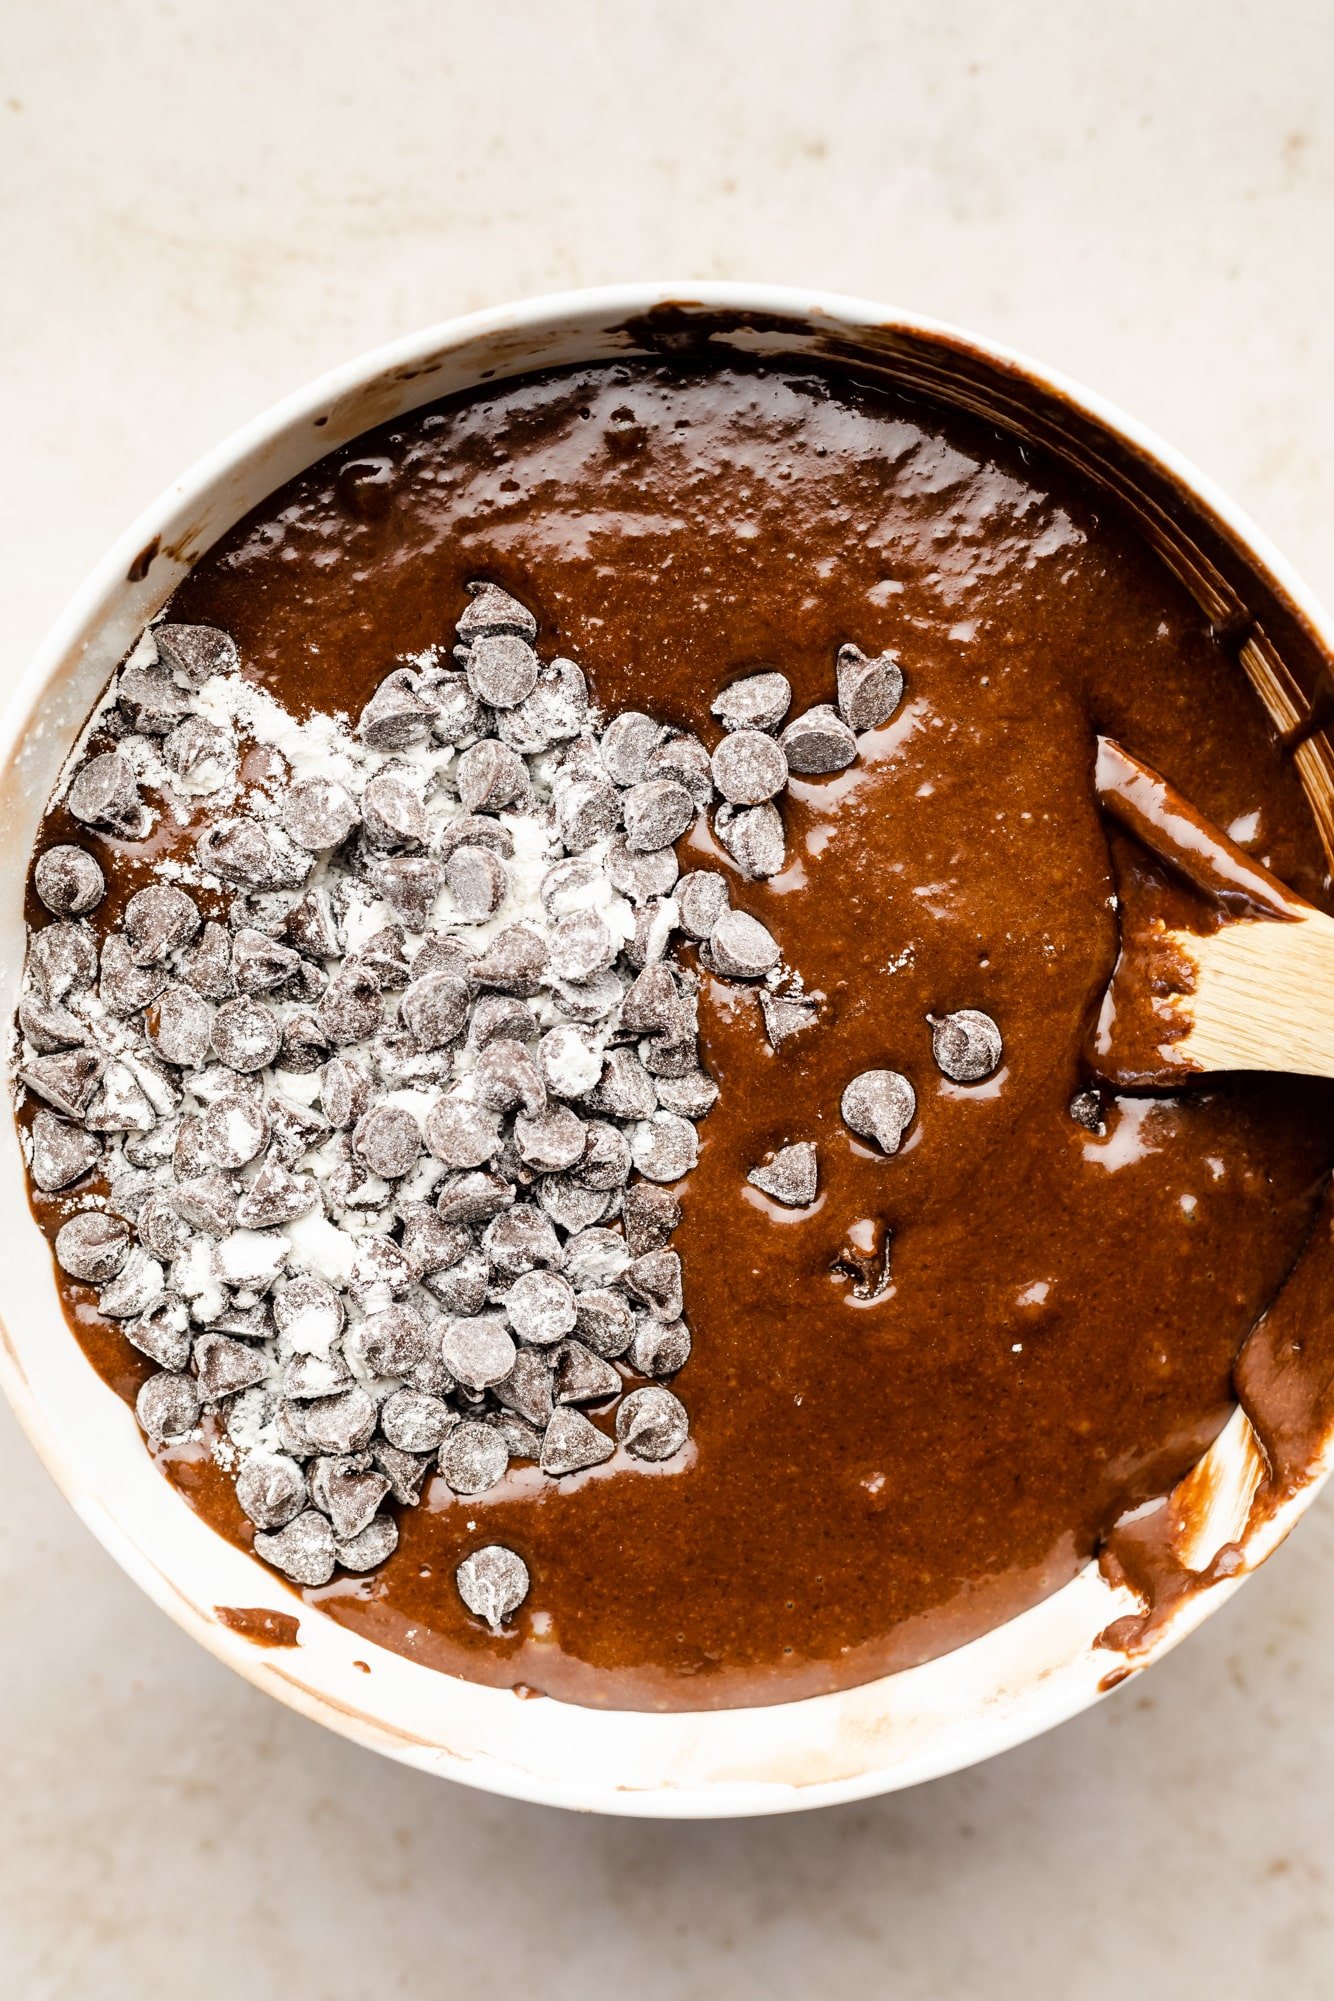 using a wooden spoon to fold chocolate chips into chocolate cake batter.